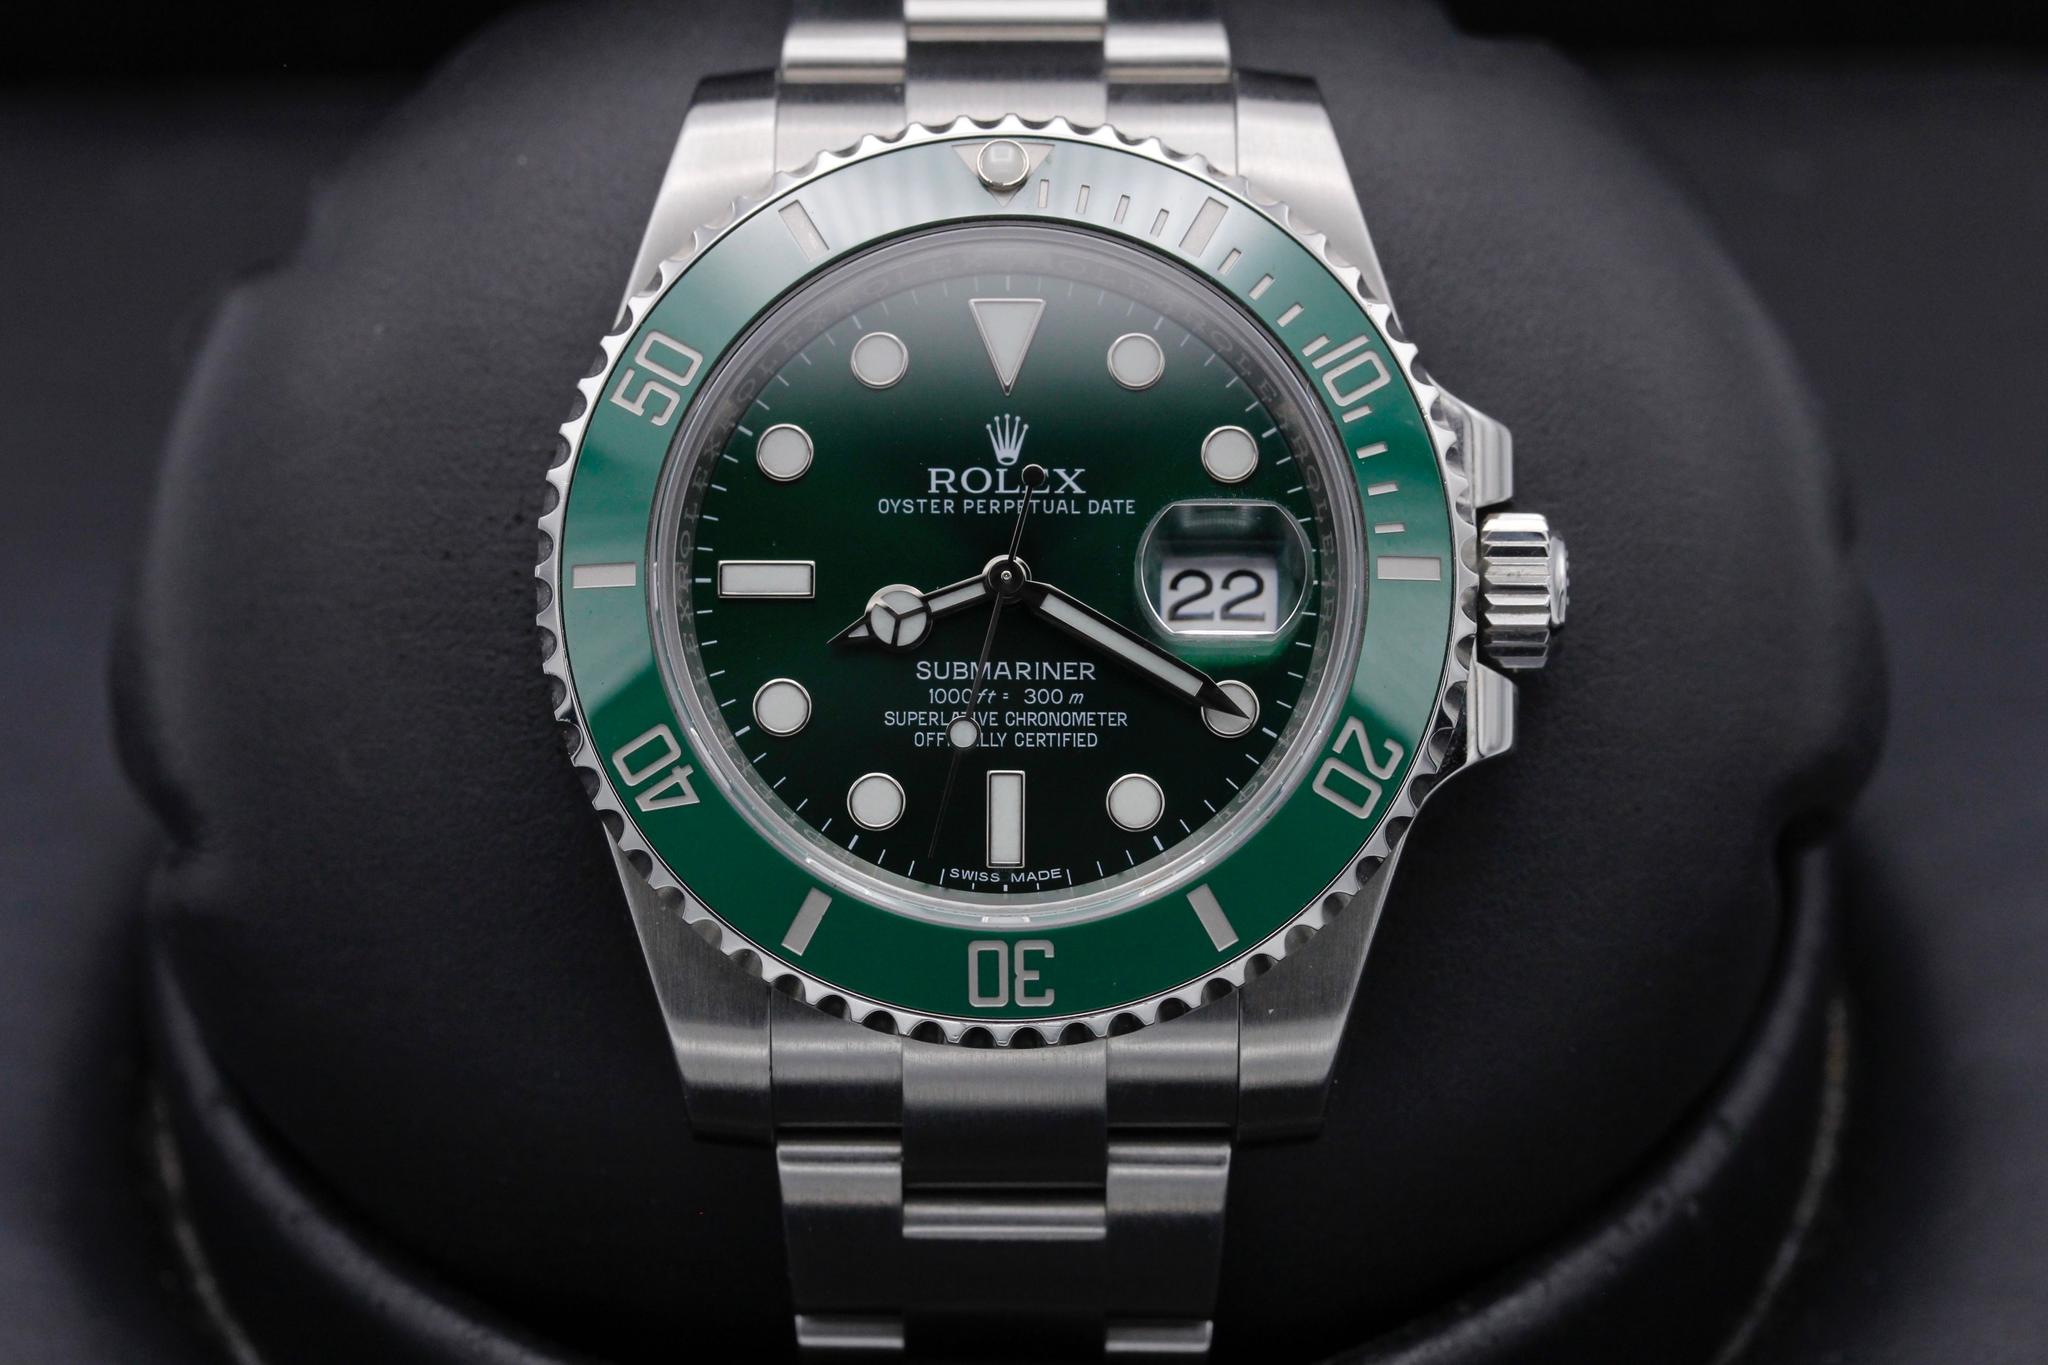 Pre-owned Rolex Submariner Watch | 116610LV | Fct Credit/Debit Card